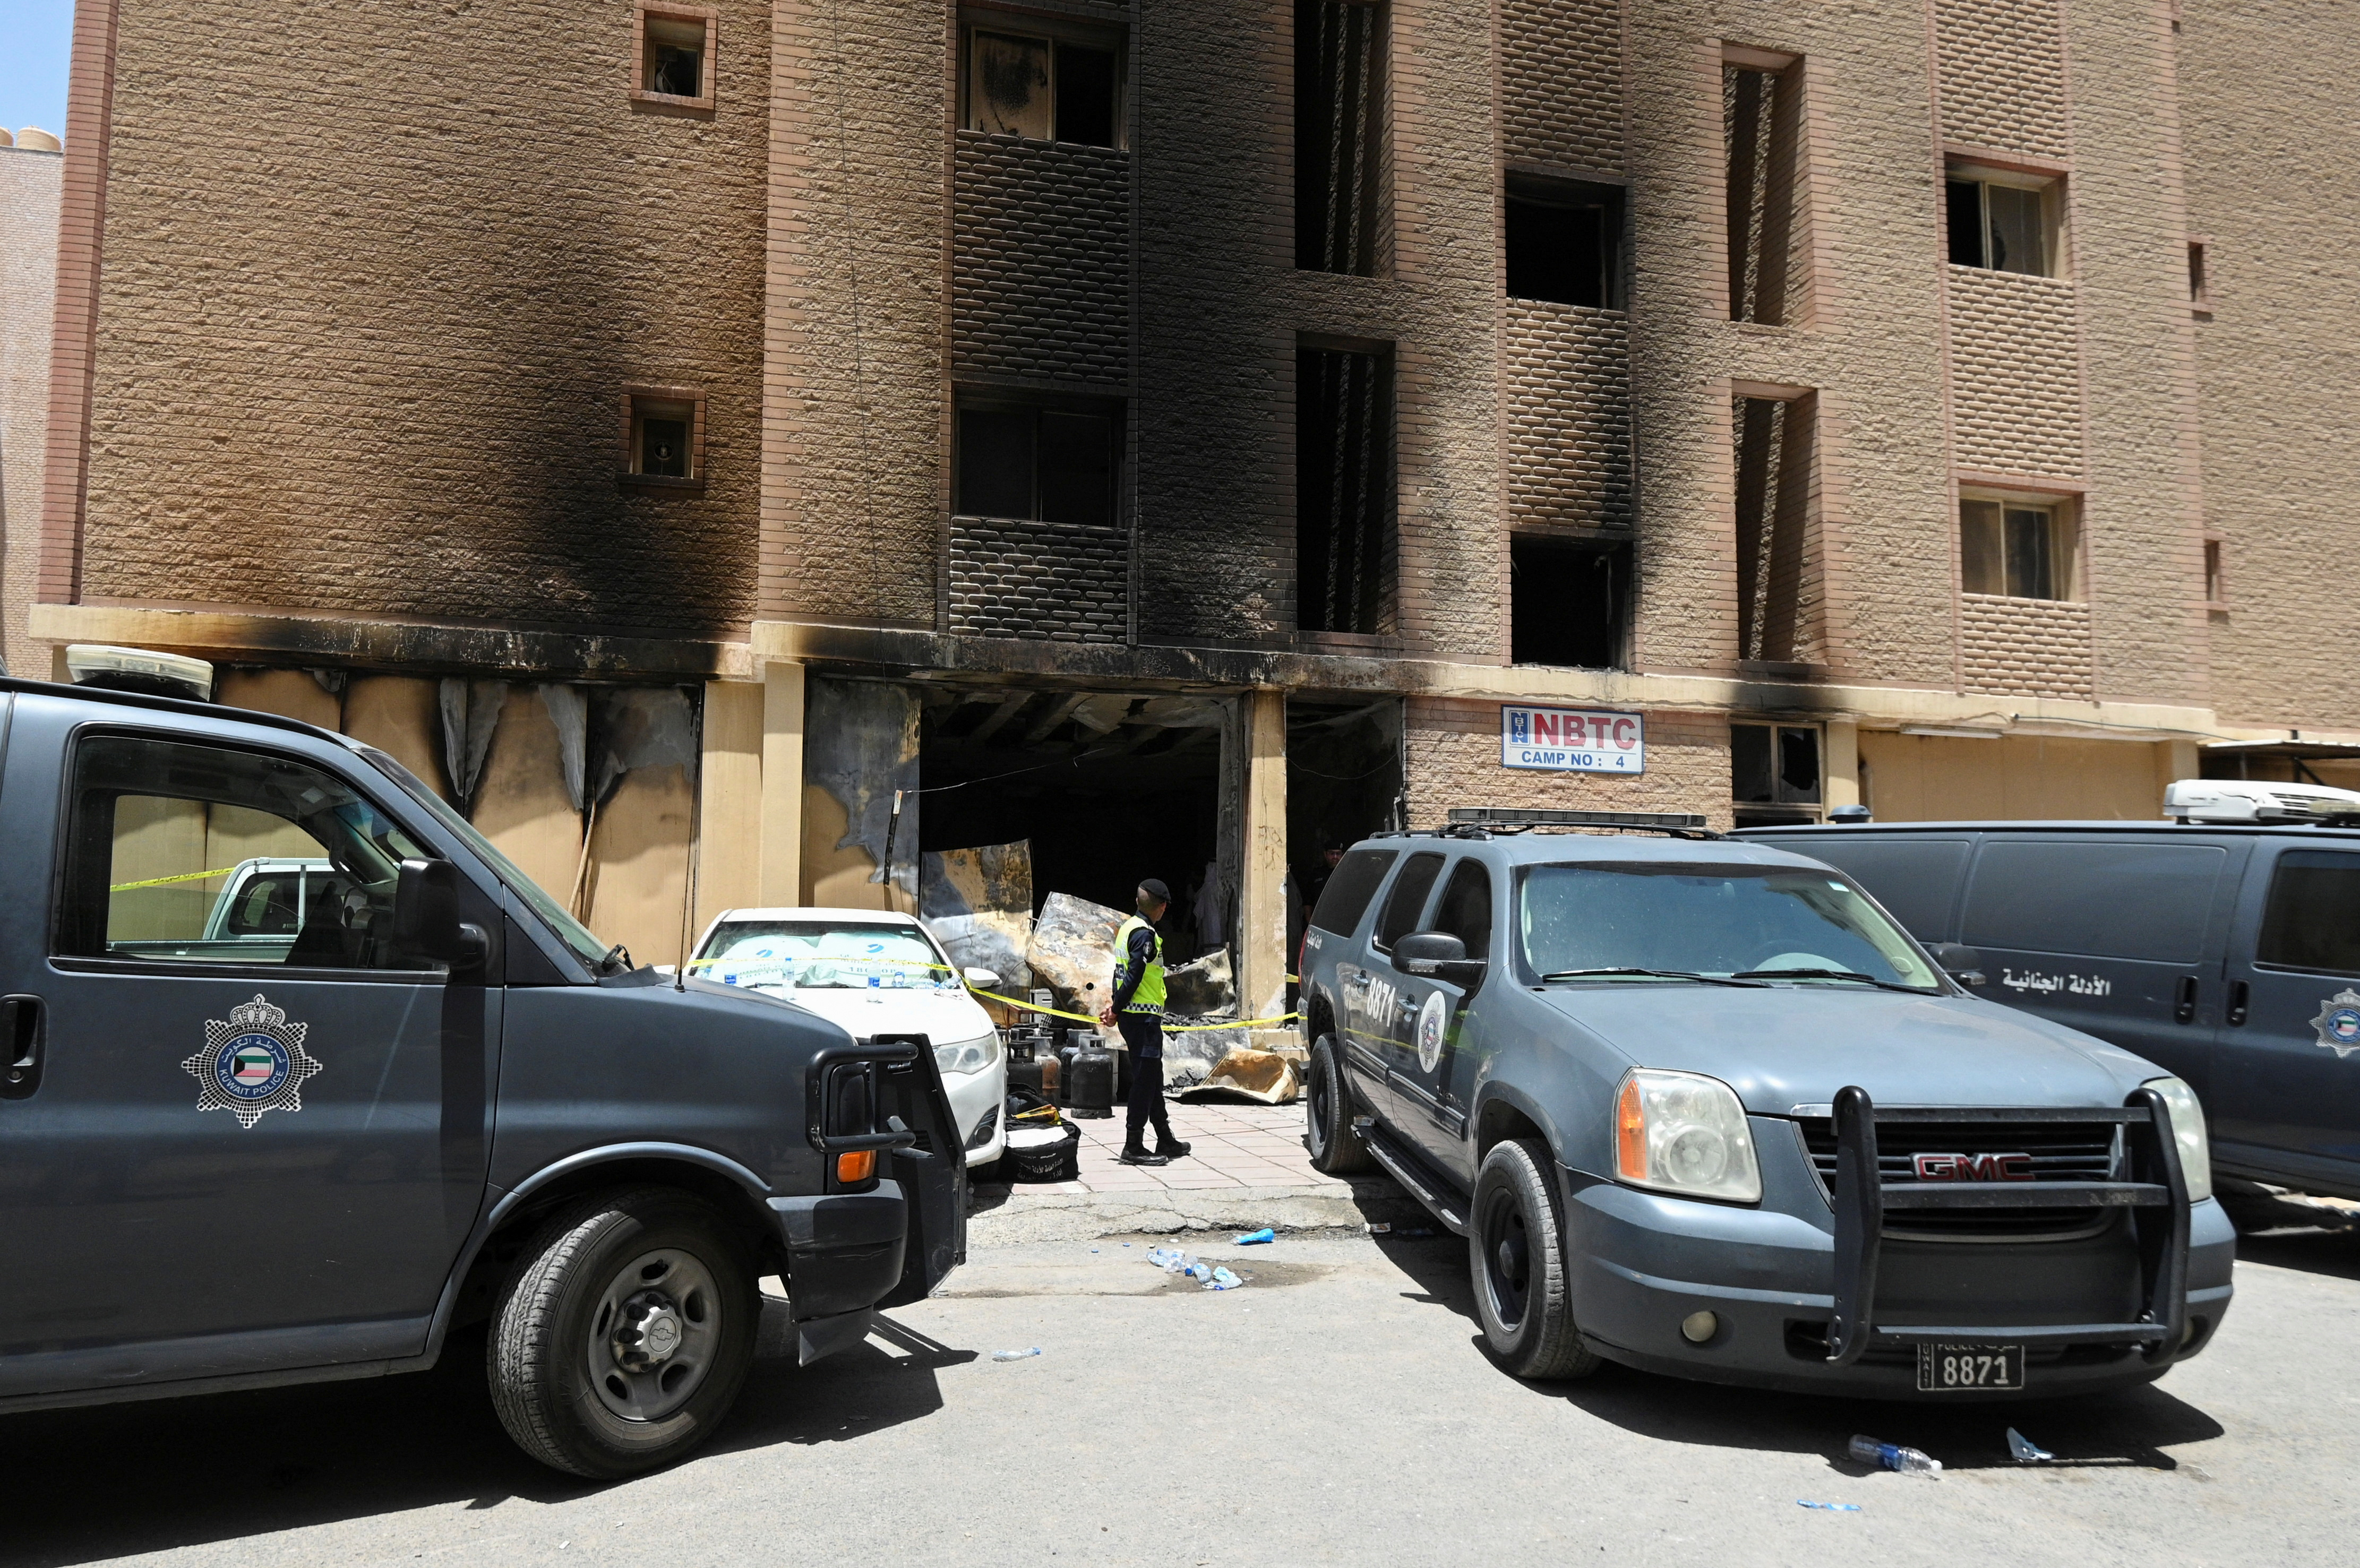 Aftermath of a deadly fire in a building, in Mangaf